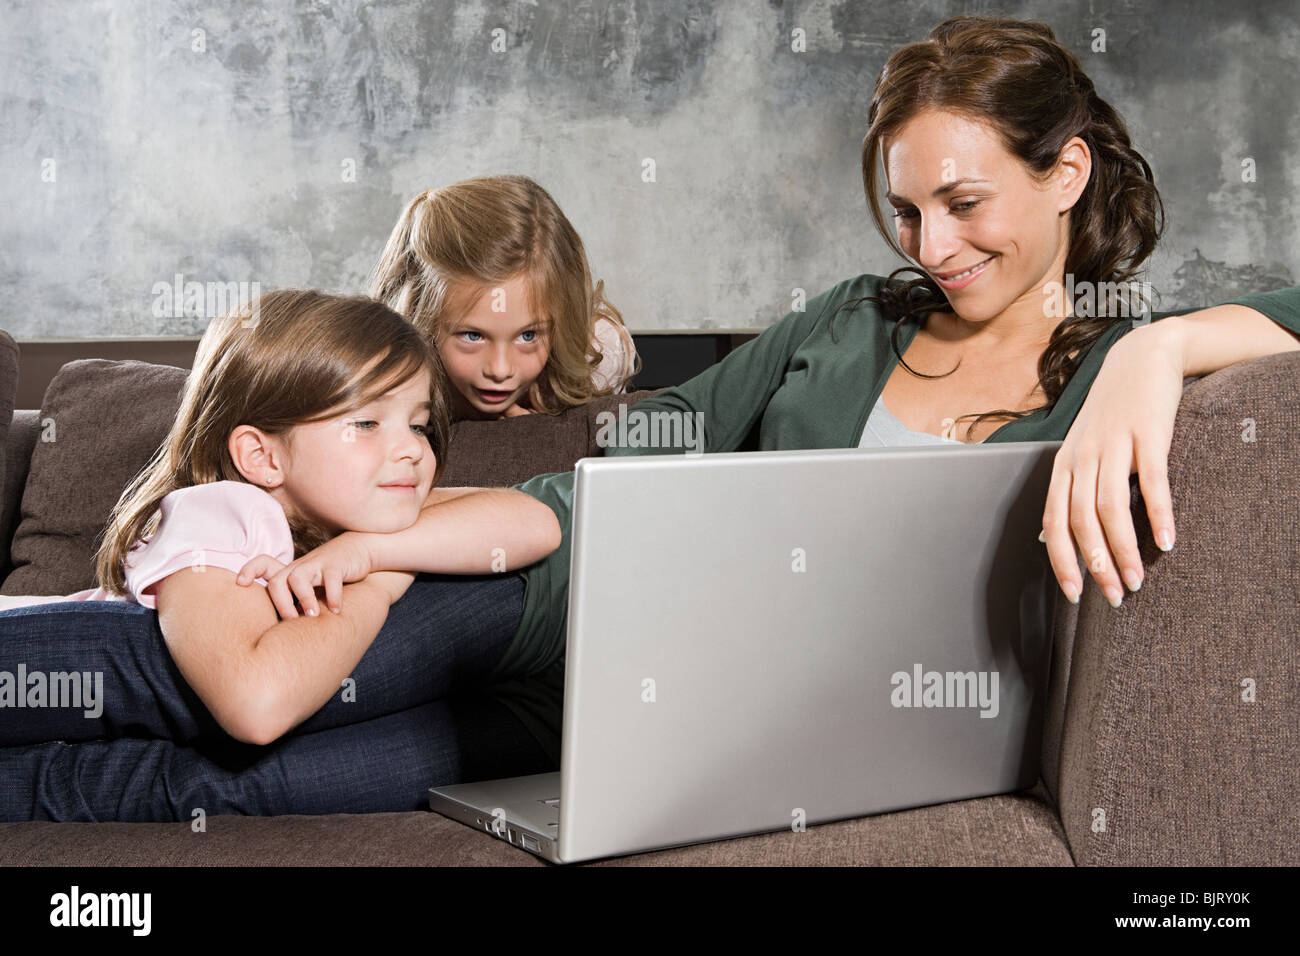 Mother and daughters looking at a laptop Stock Photo